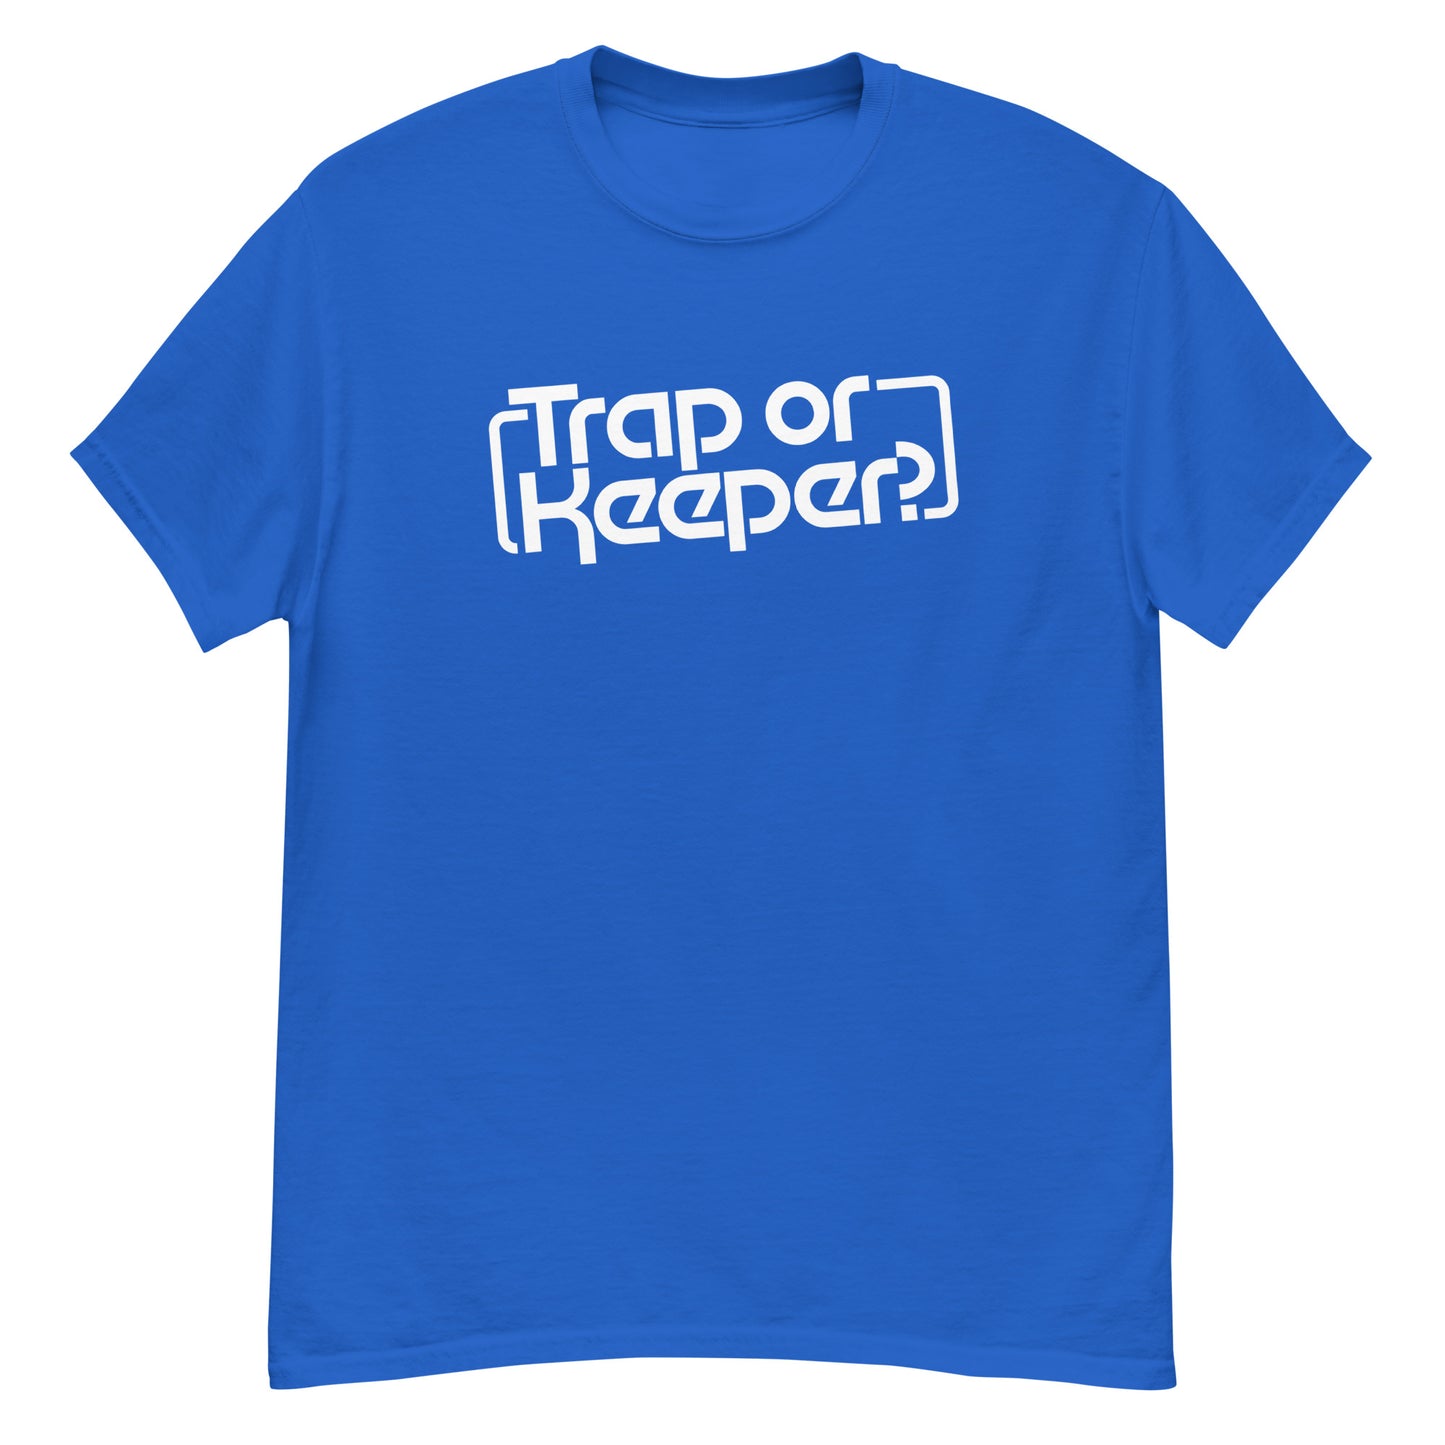 Trap or Keeper? t-shirt